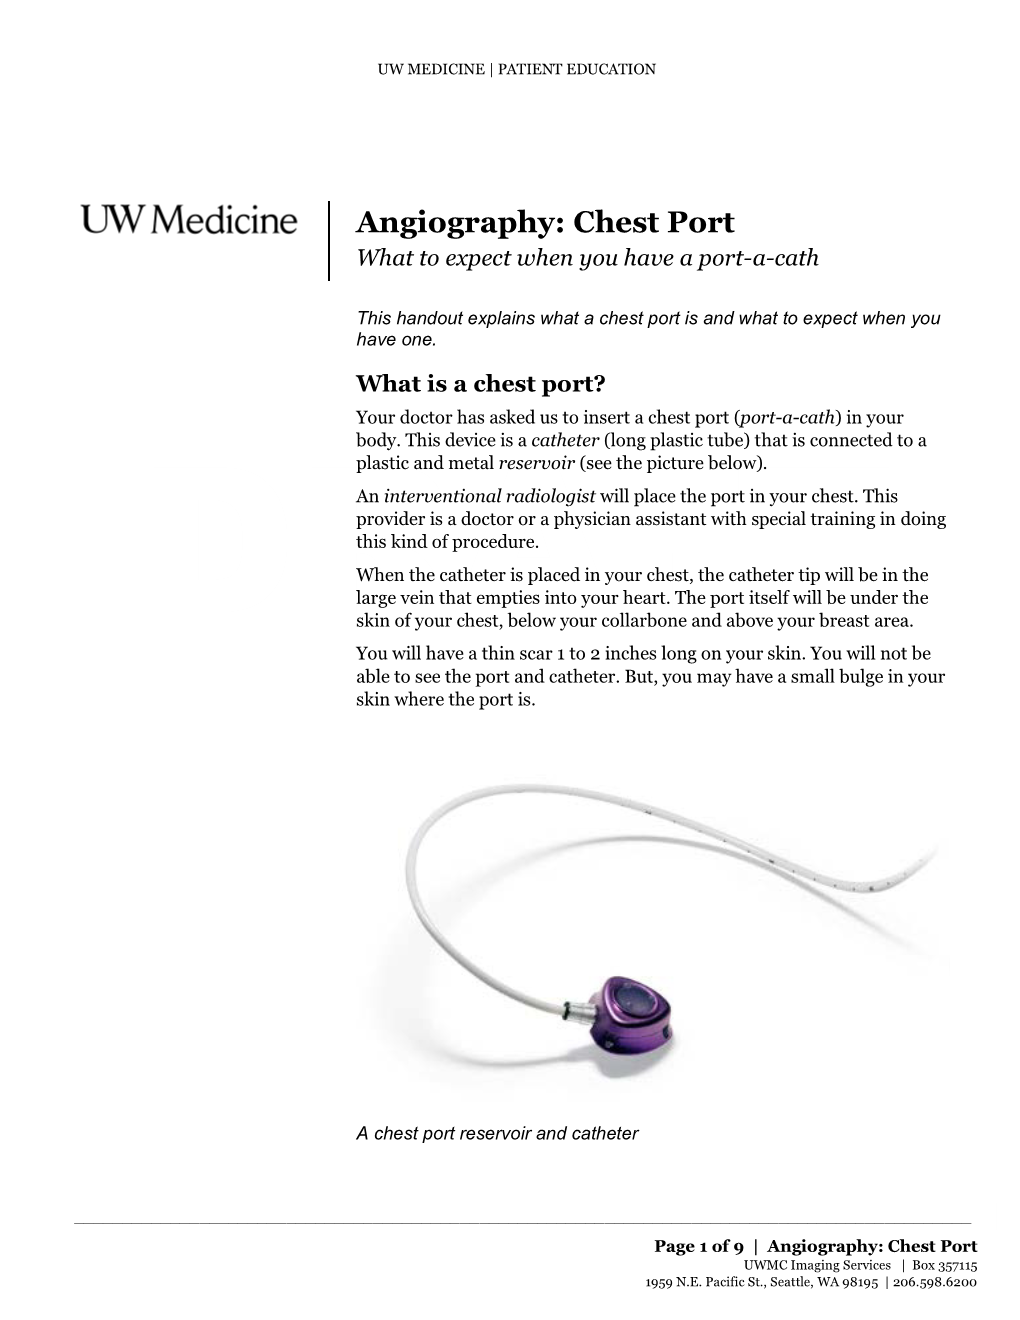 Angiography: Chest Port | | What to Expect When You Have a Port-A-Cath